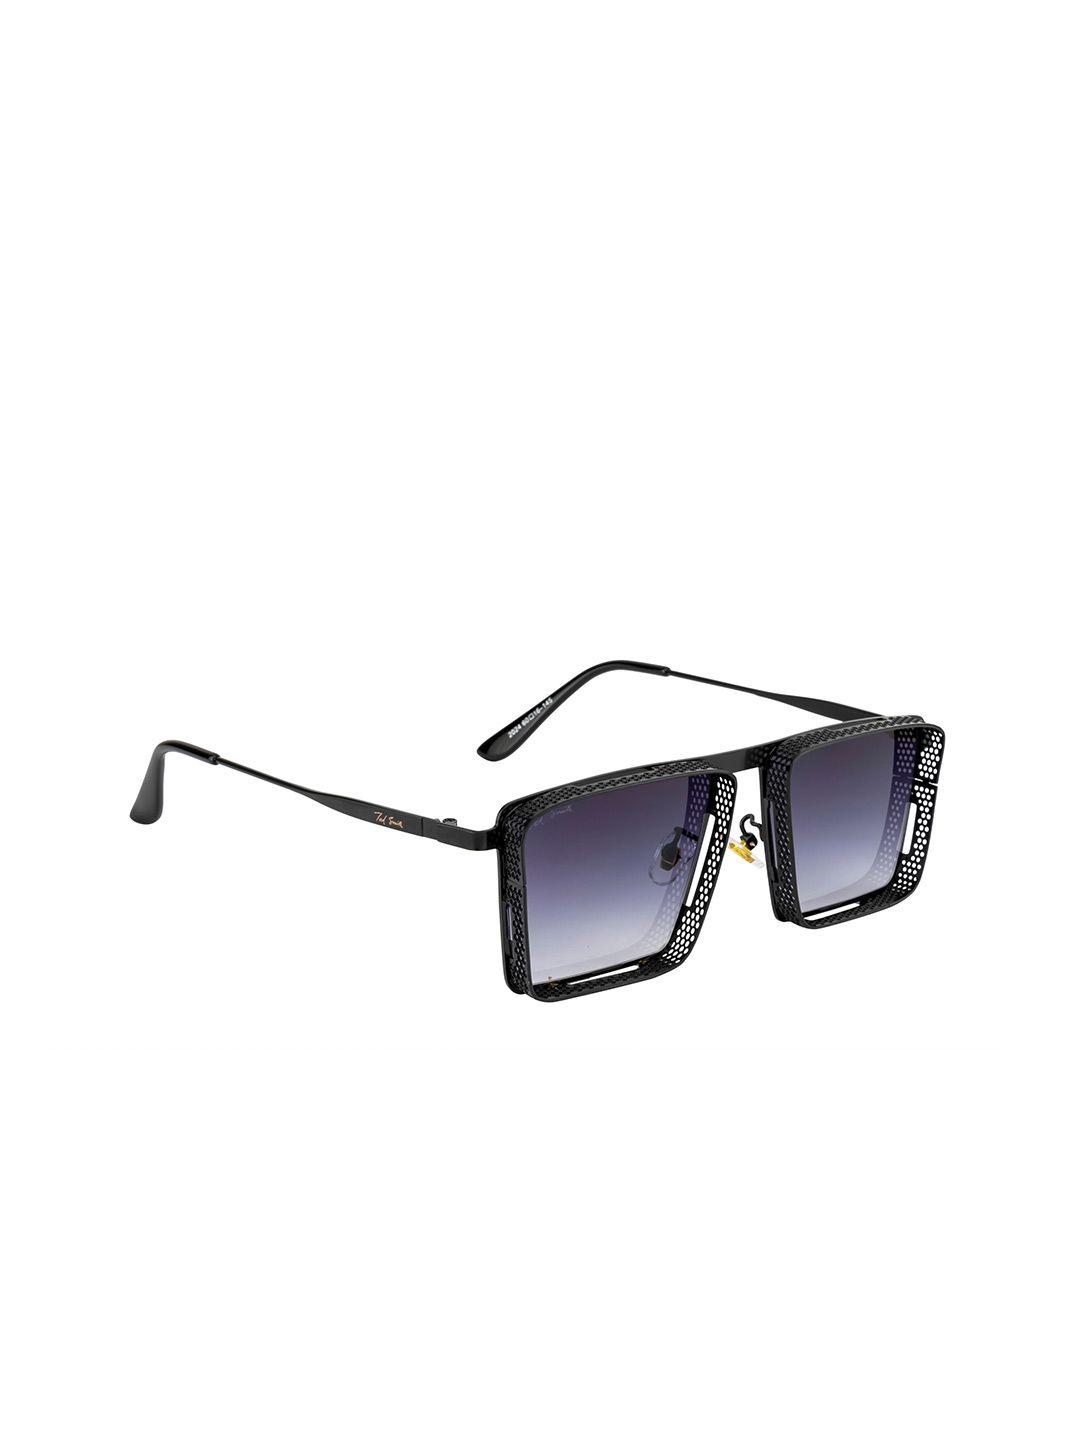 ted smith unisex purple lens & black square sunglasses with uv protected lens